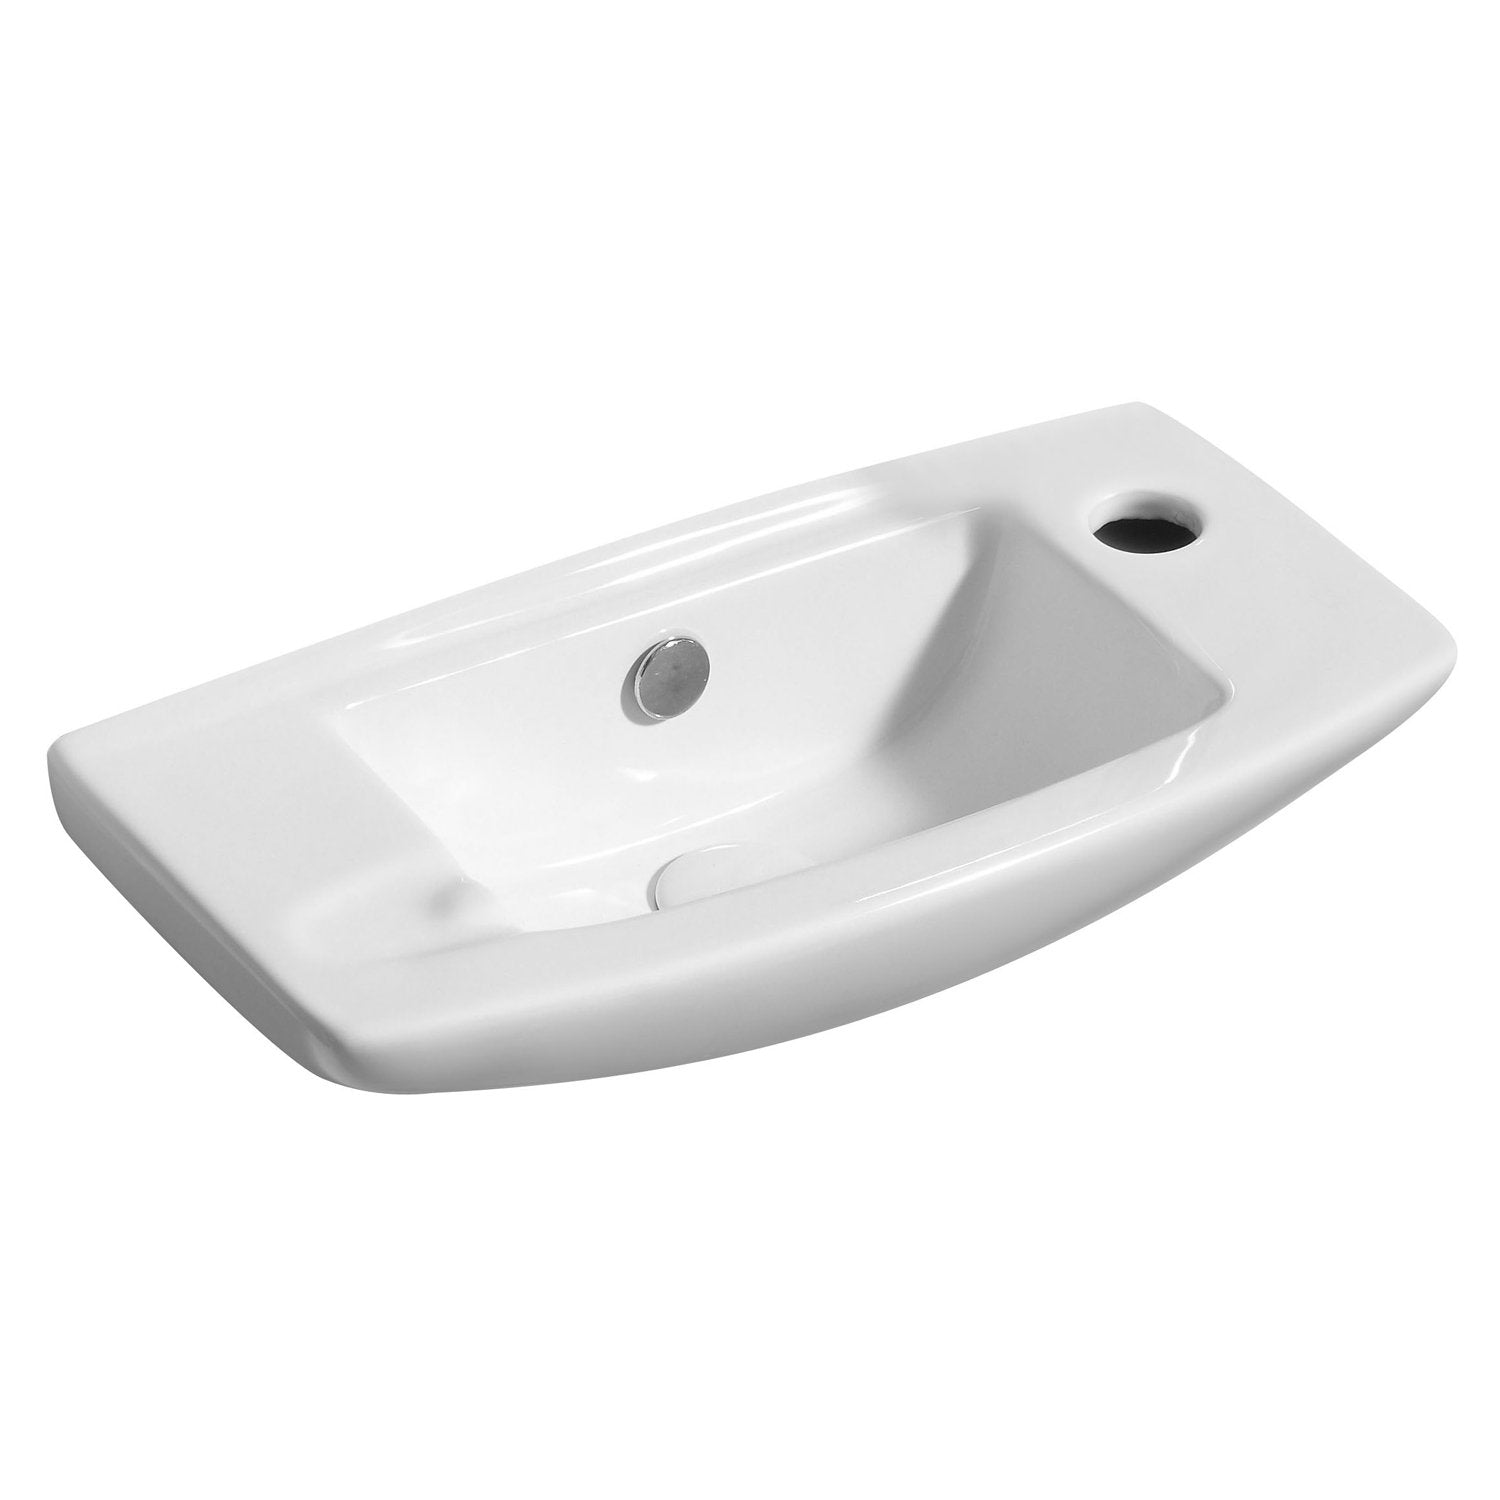 ALFI ABC115 White 20" Small Wall Mounted Ceramic Sink with Faucet Hole